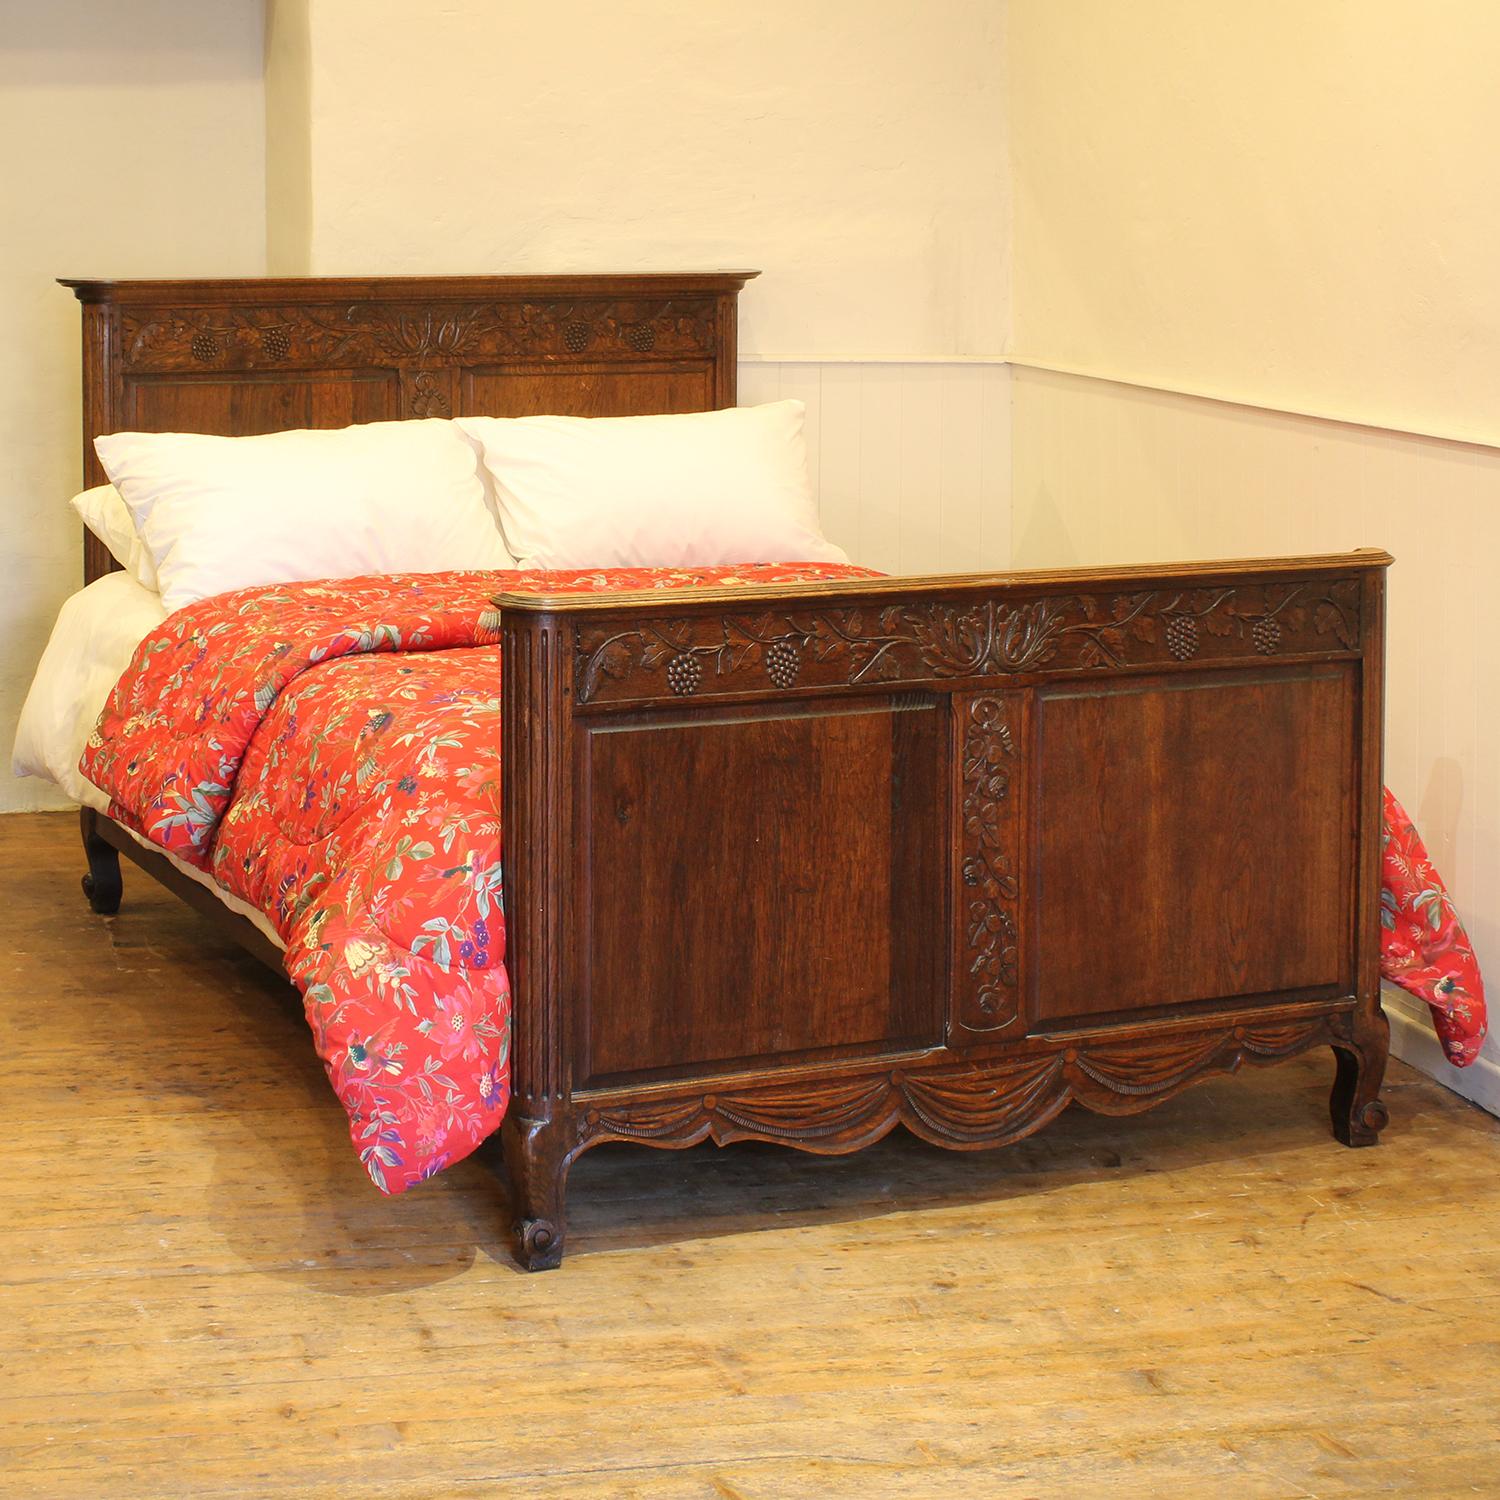 A country style oak bed with fine carving depicting grape vines, roses and swags.

This bed accepts a standard double, 4ft 6in (54 in), base and mattress set.

The price is for the bed frame with a firm bed base to support the mattress. This can be